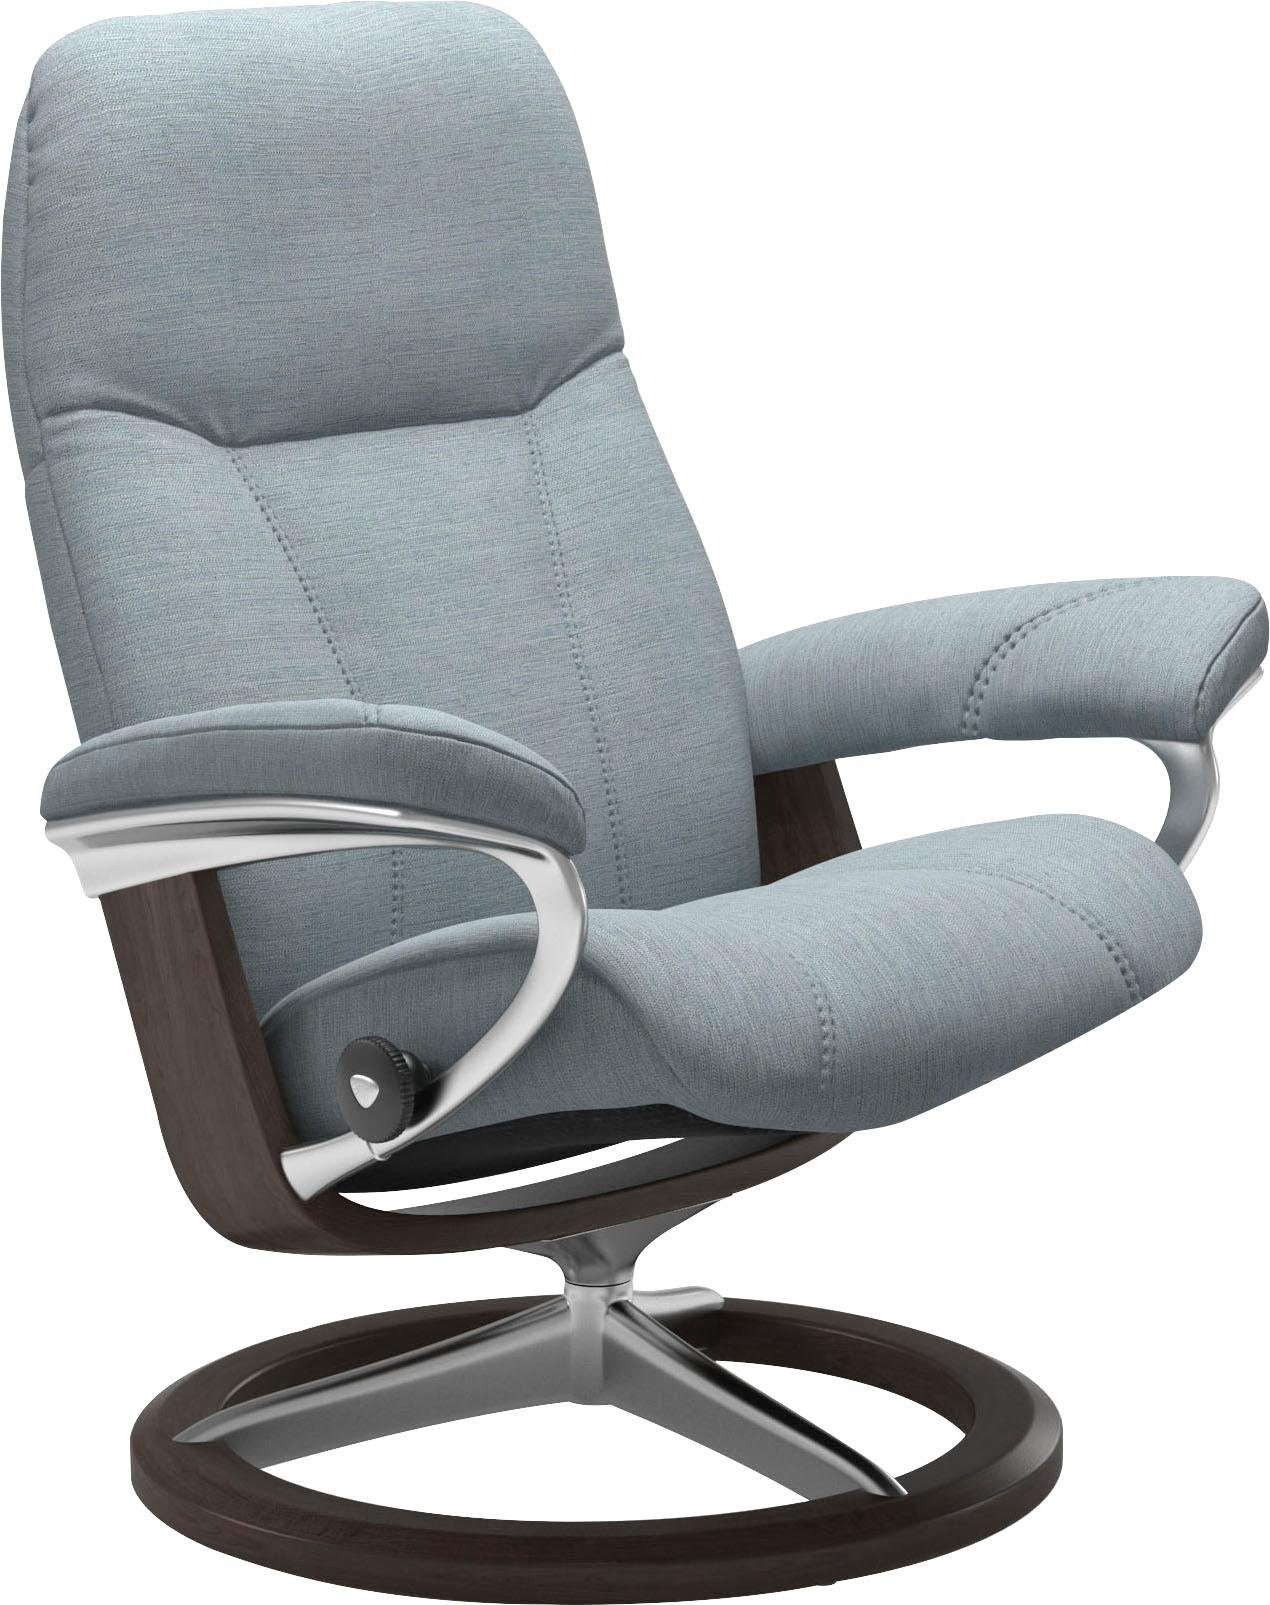 Relaxsessel mit Signature Gestell Base, Wenge Größe Stressless® Consul, L,